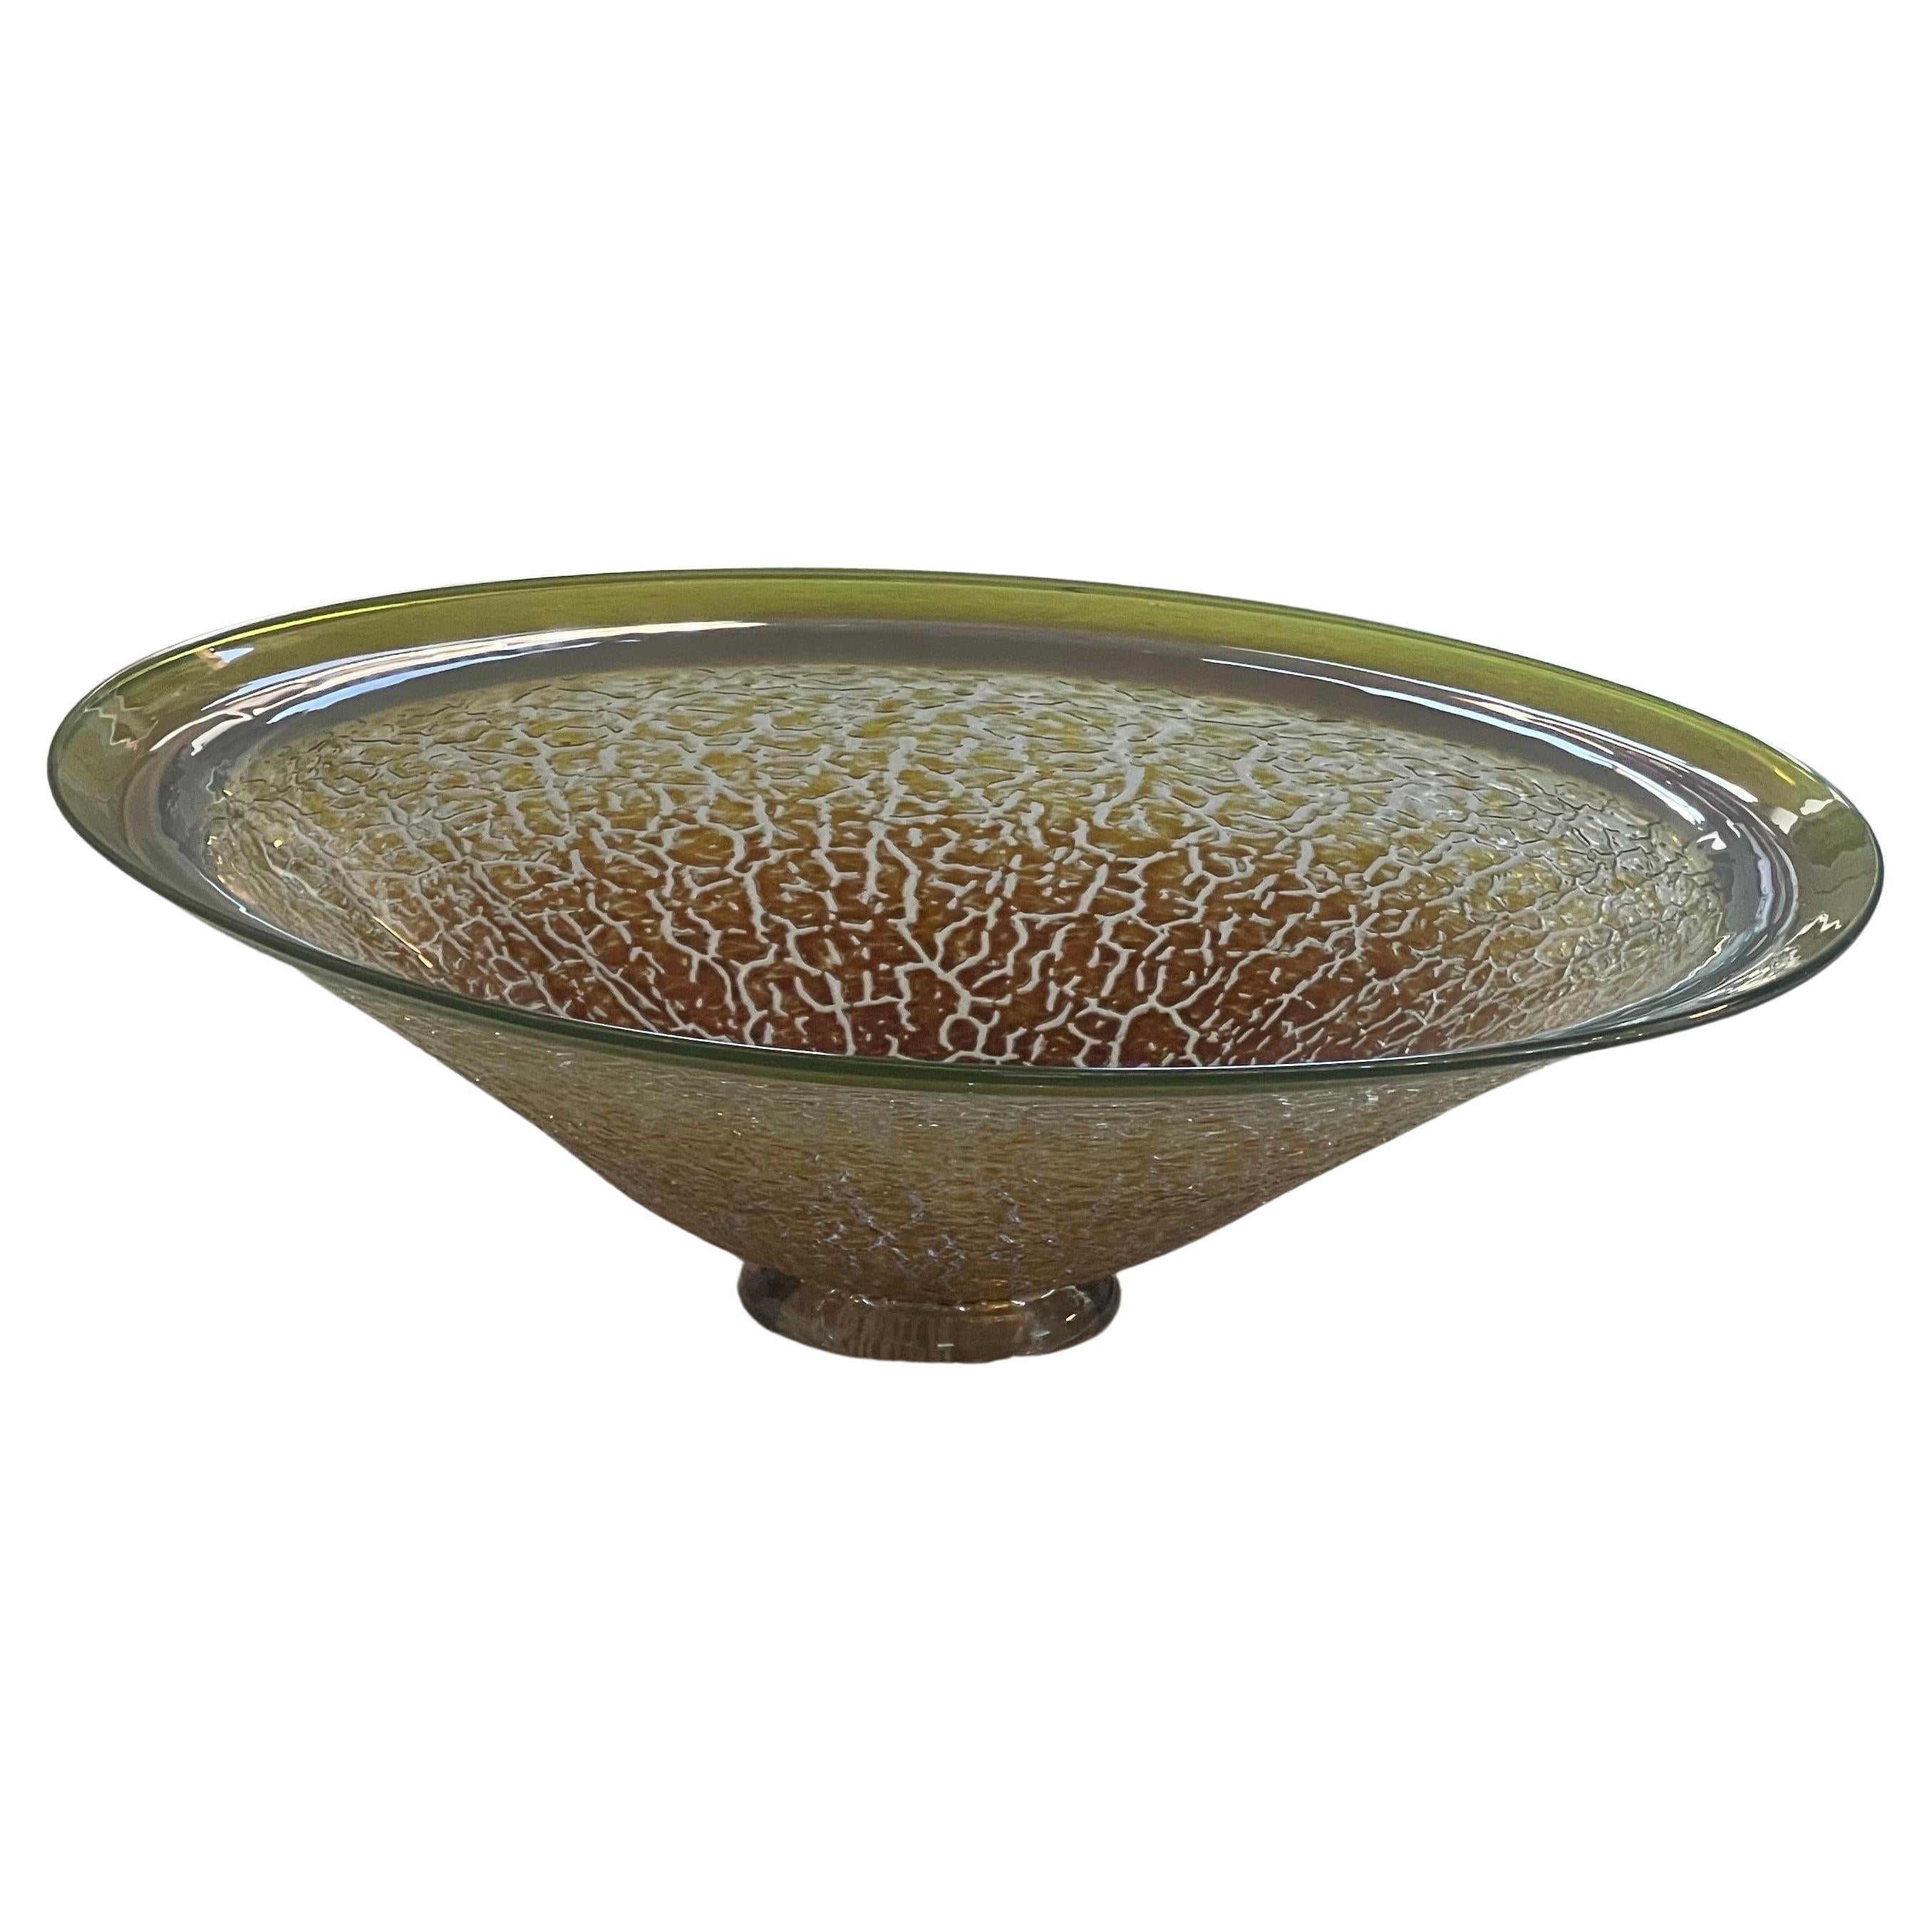 Stunning mouth blown jade craquel art glass bowl / centerpiece by Paul Willsea and Carol O'Brien circa 1990s. This beautiful freeform piece measures 19